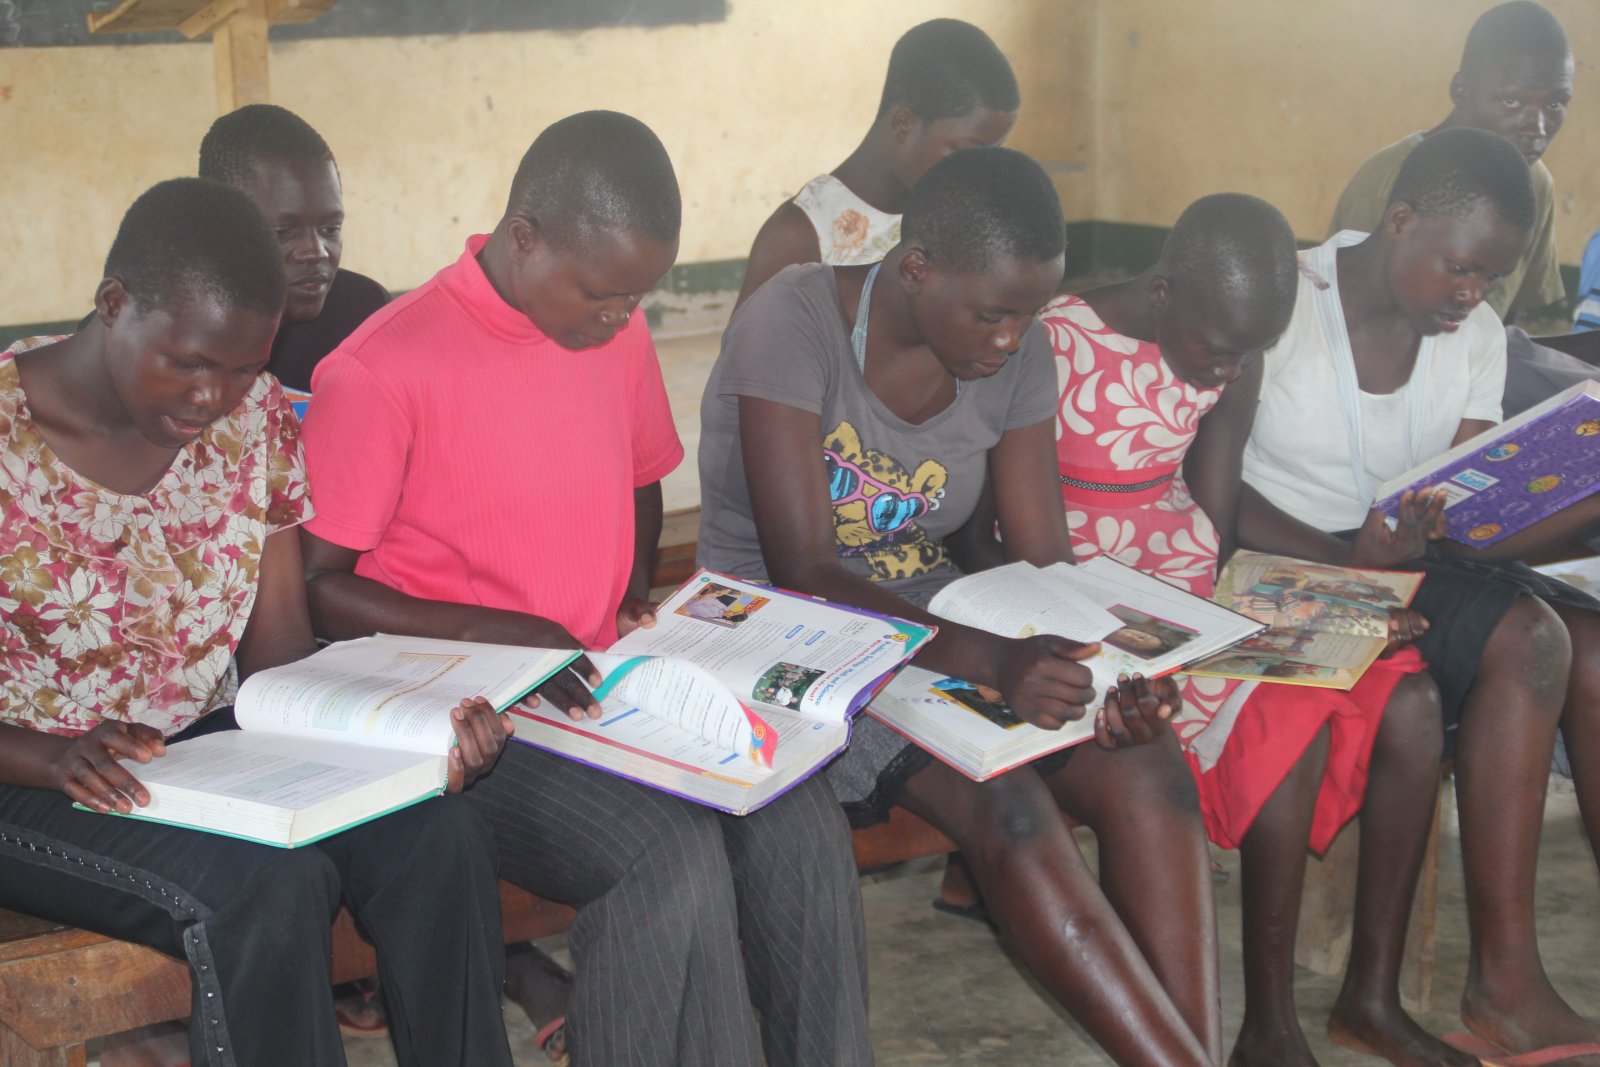 Chain of Hope provides shelter and Education for girls affected (including gender based violence) by the Lord's resistance Army conflict in Northern Uganda